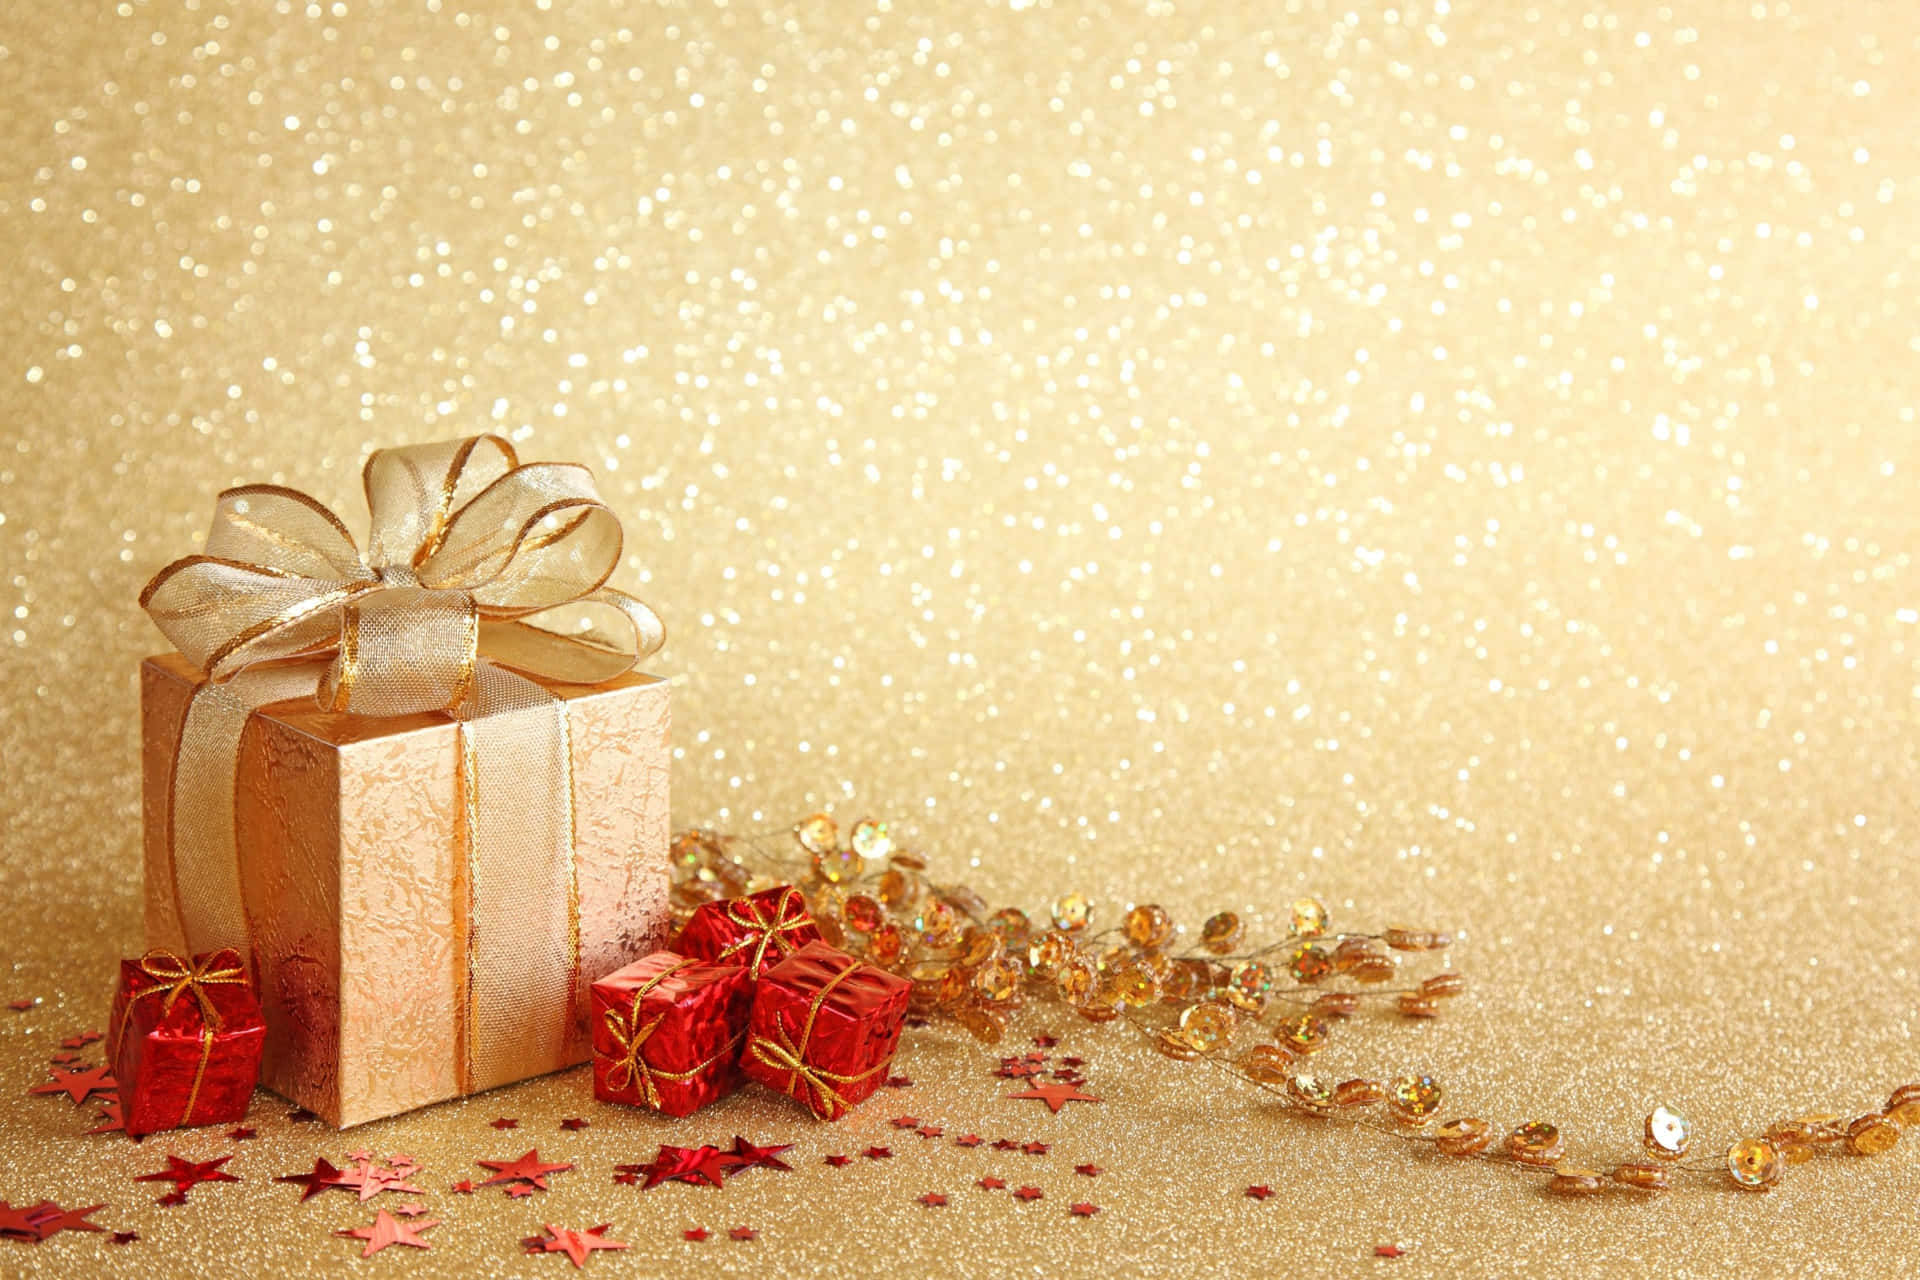 Gold And Red Christmas Gifts With Glitter Picture